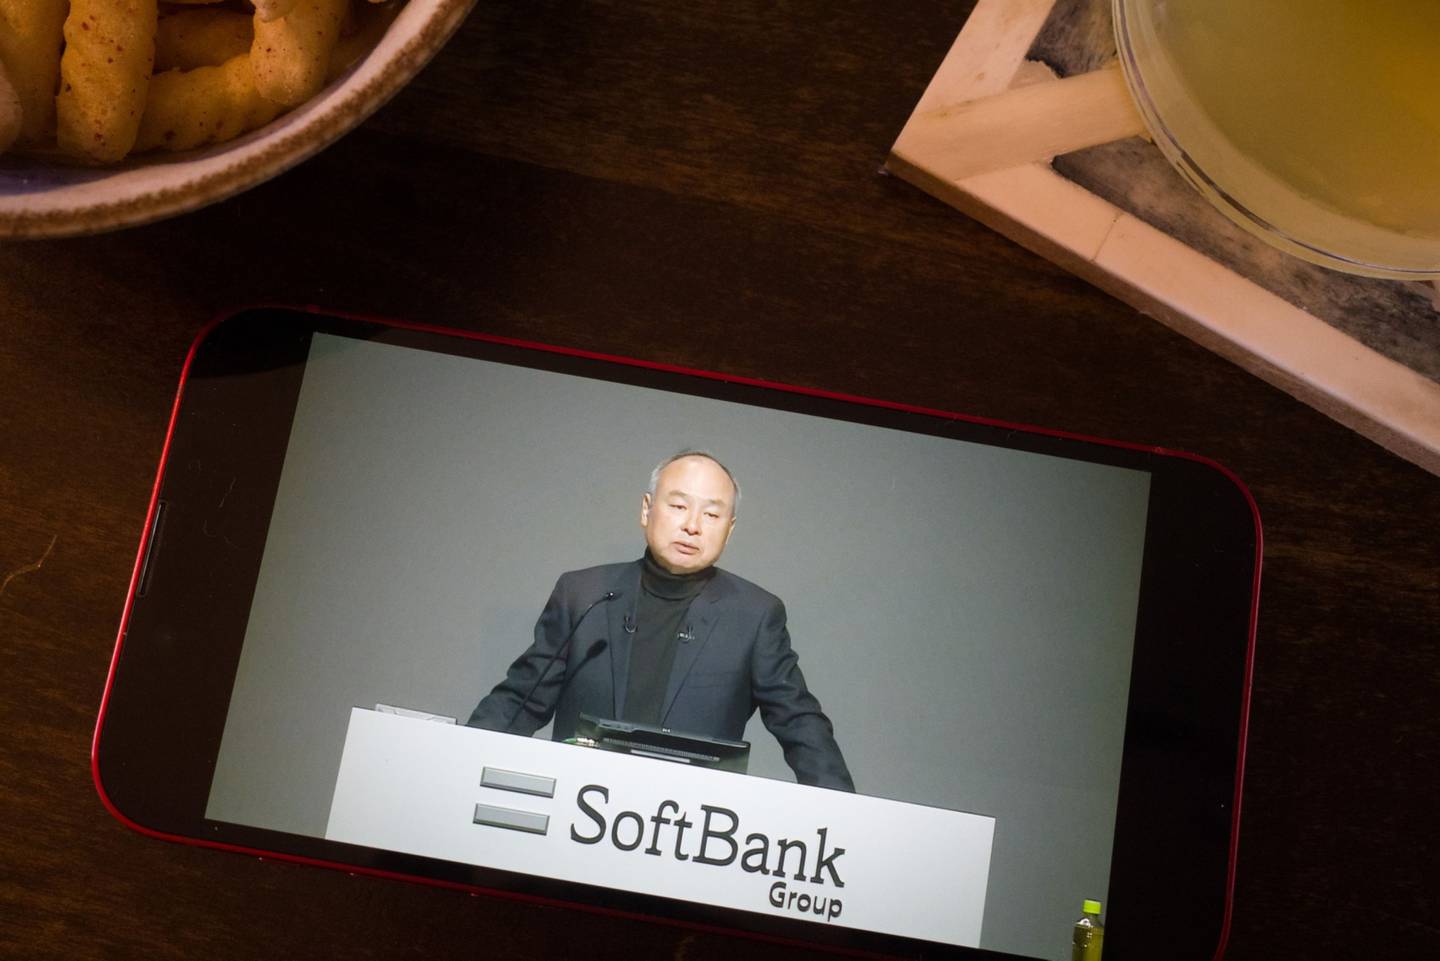 Each year, SoftBank Group pays about $540 million in dividends to shareholders (though much ends up in Masayoshi Son’s pockets).